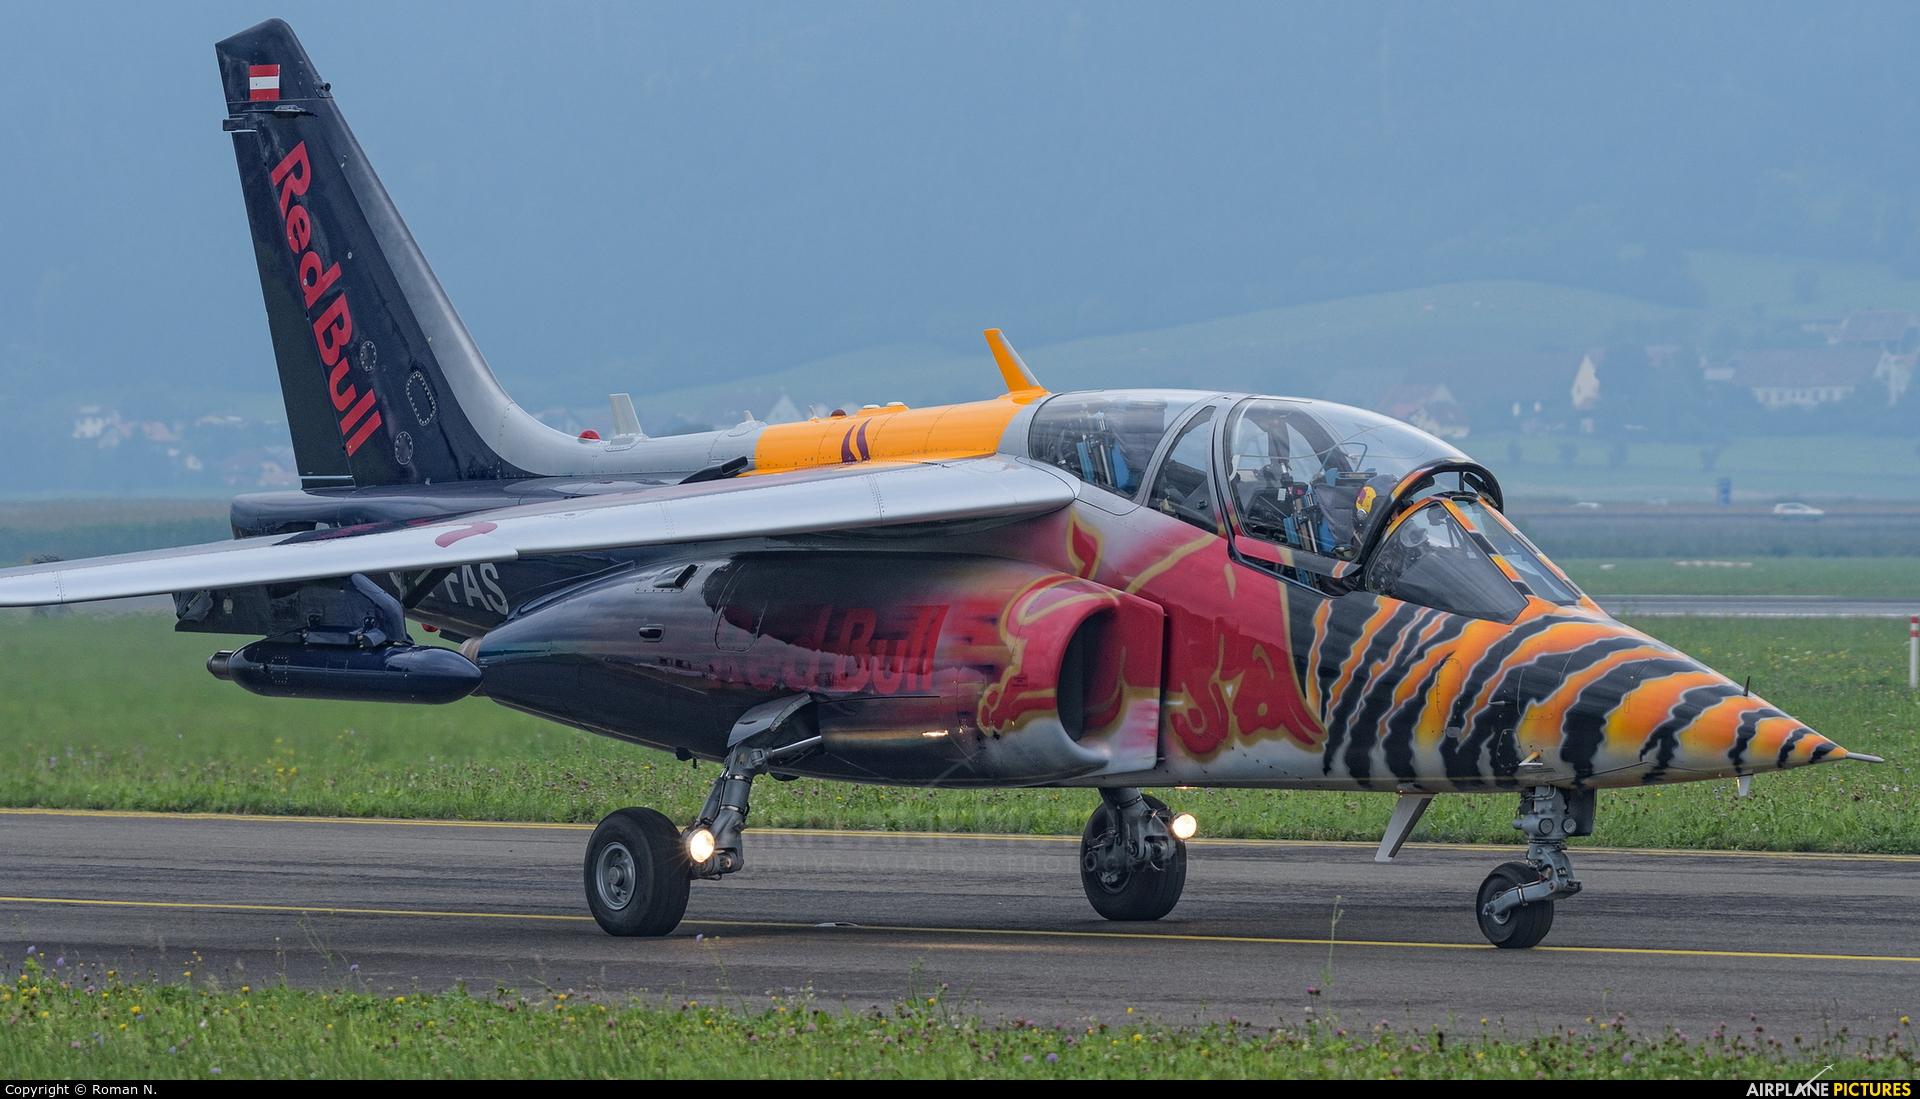 Red Bull OE-FAS aircraft at Zeltweg